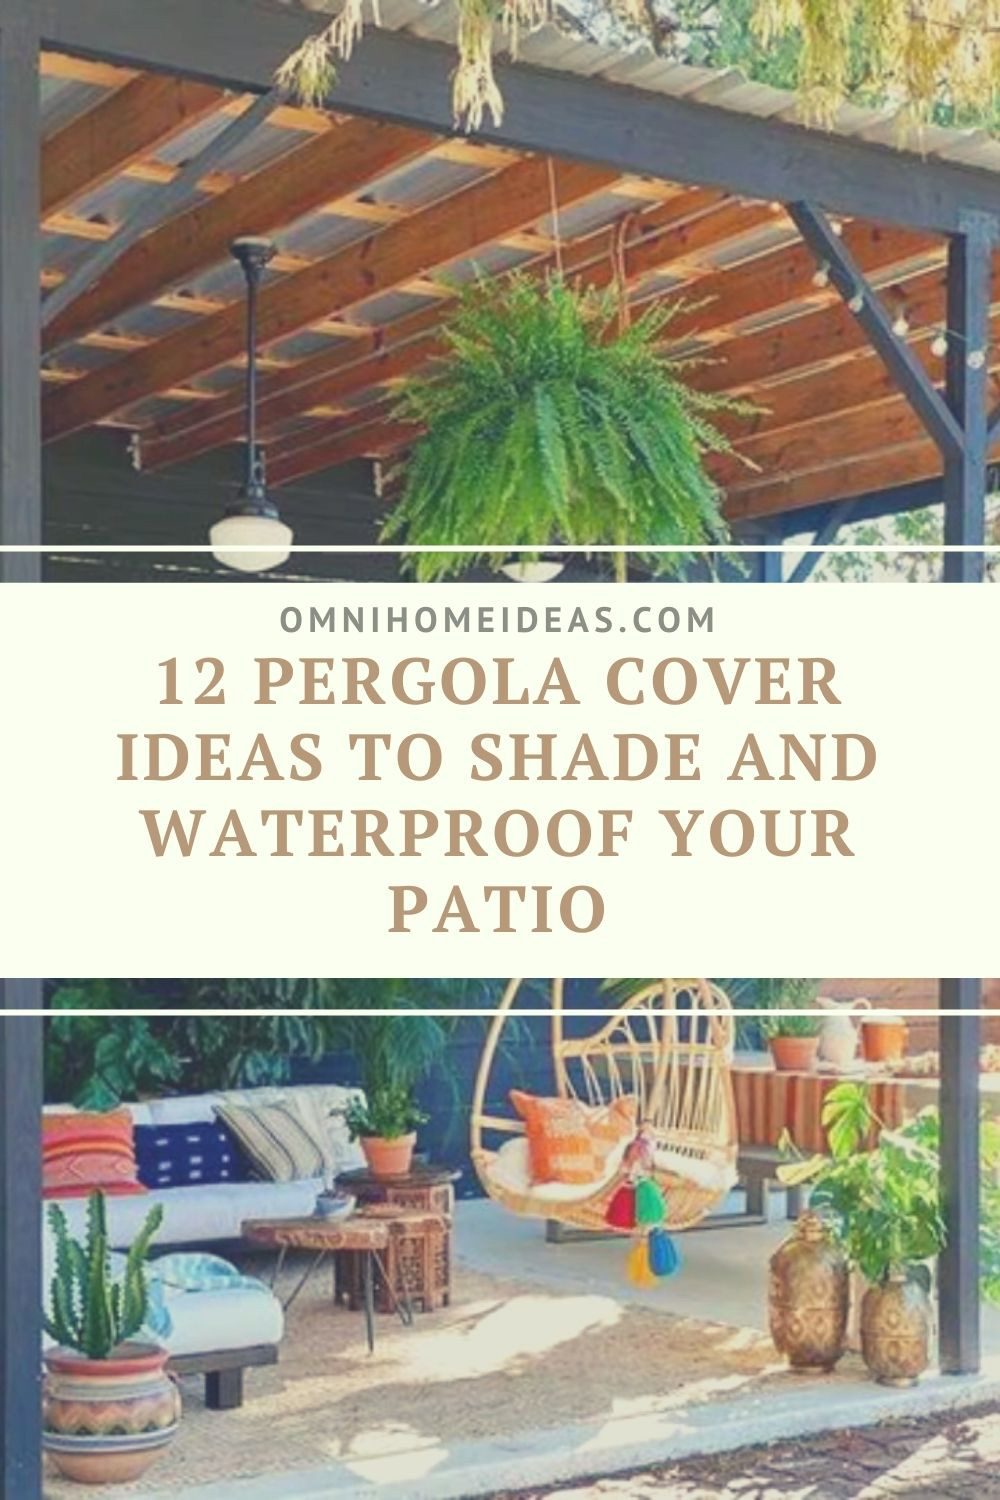 pergola cover ideas to shade and waterproof patio